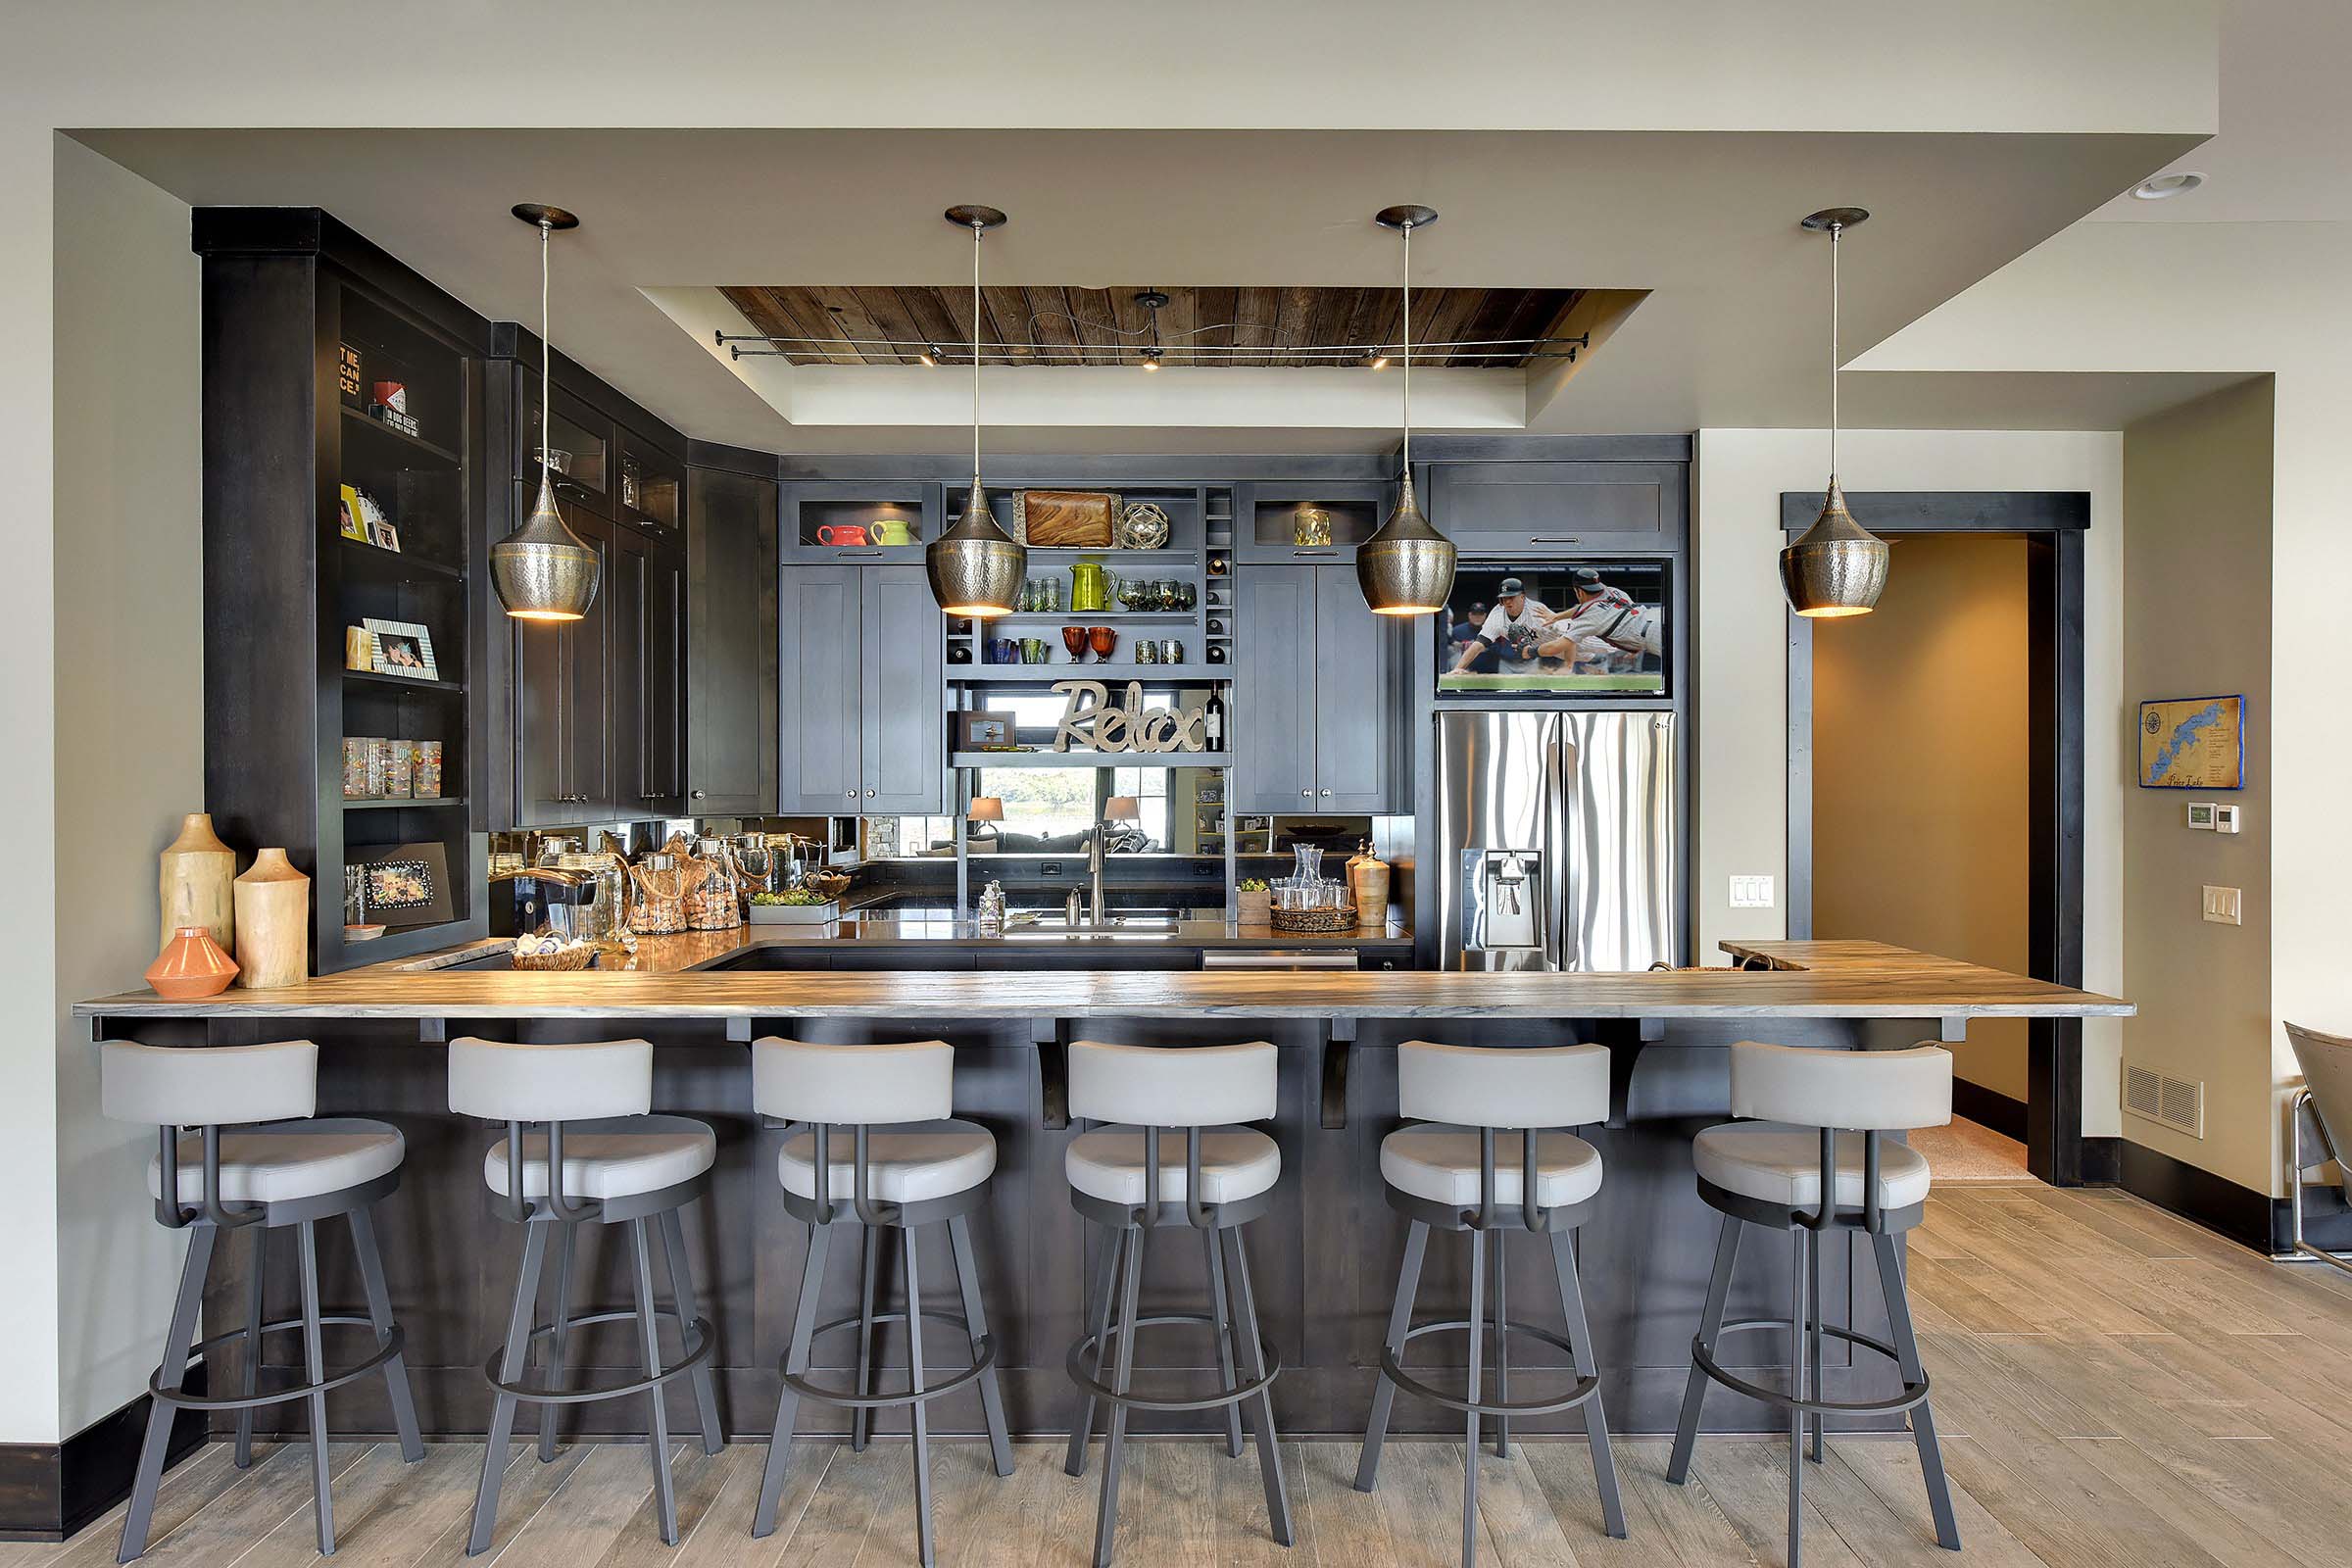 Modern kitchen with gray rustic cabinets, wood inset ceiling and plenty of seating at the counter.